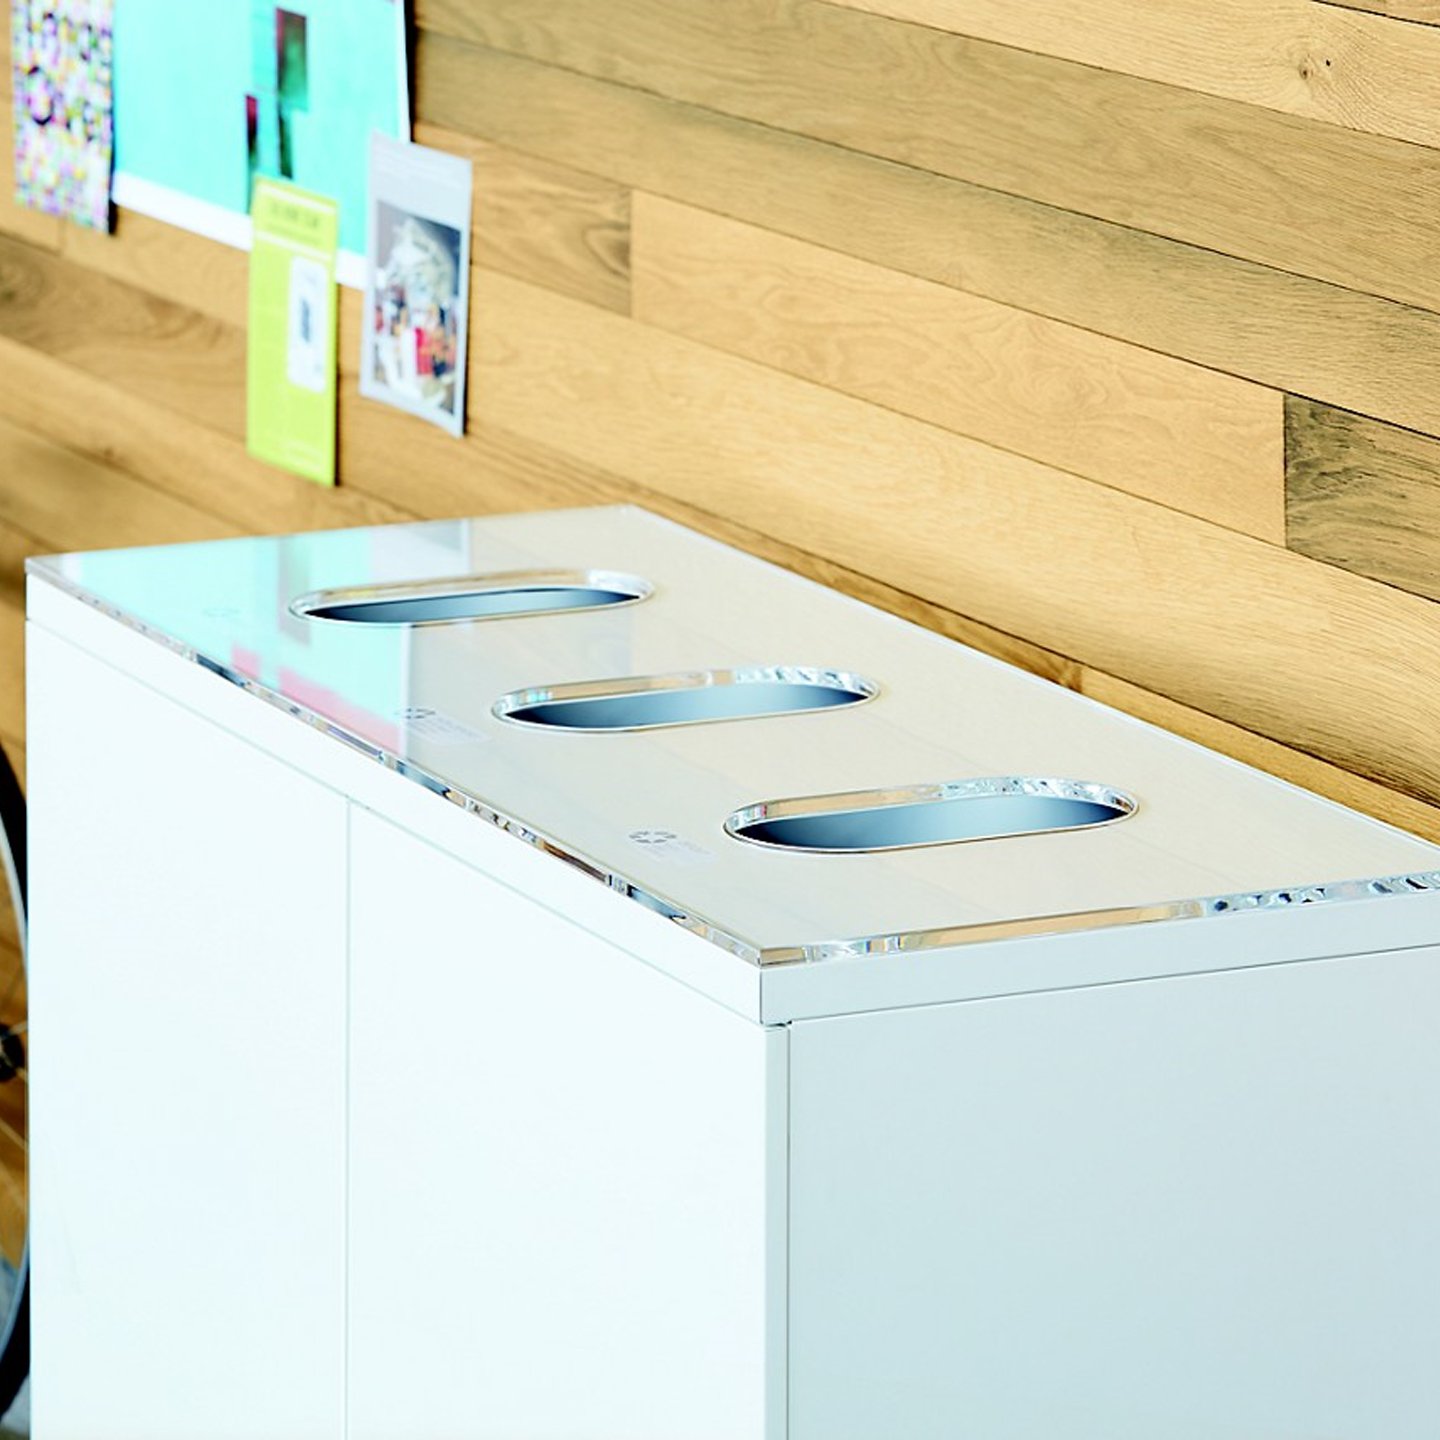 Three section X Series recycling unit in white in open workspace